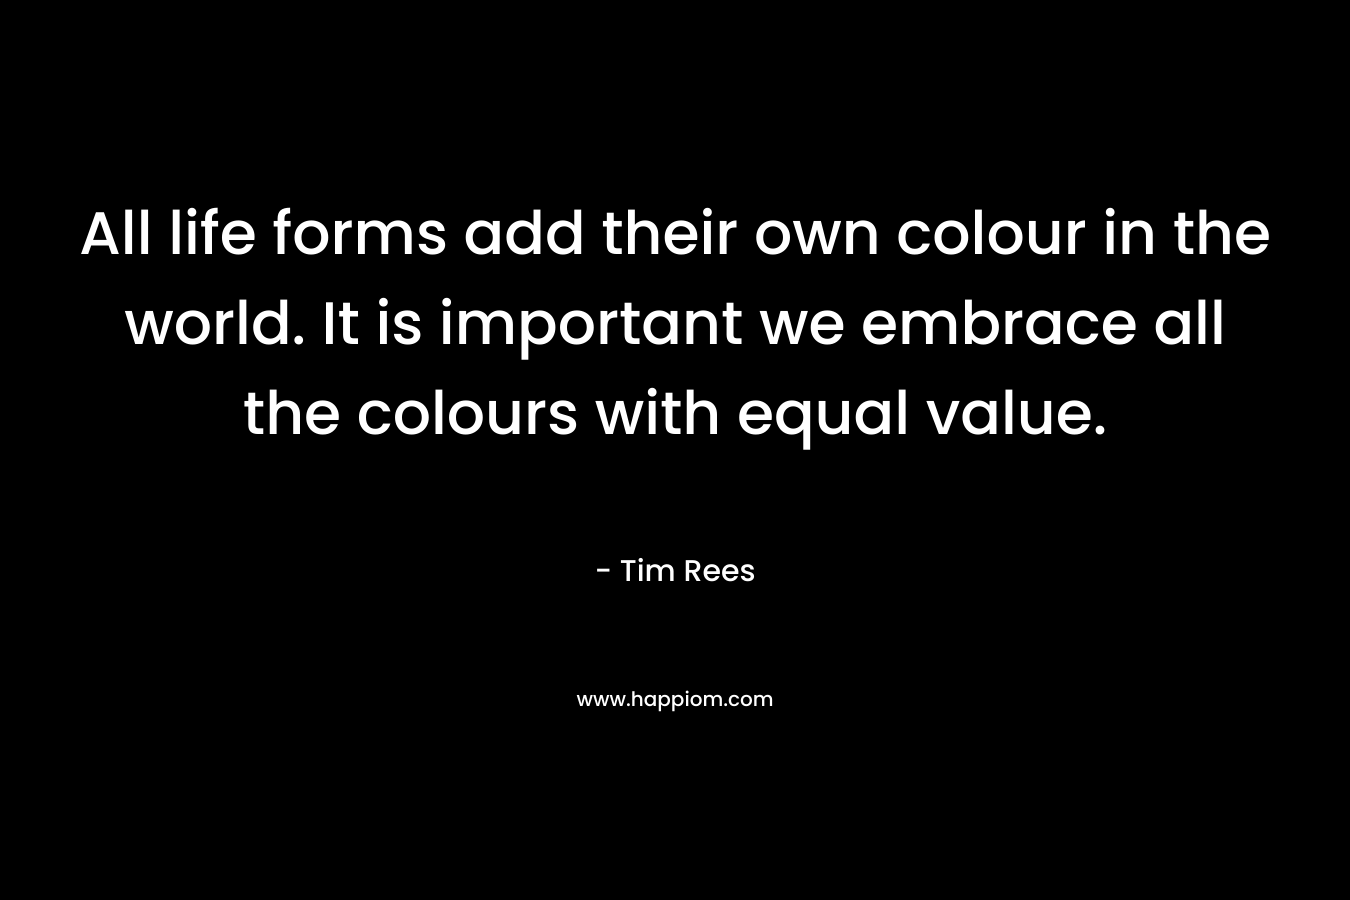 All life forms add their own colour in the world. It is important we embrace all the colours with equal value. – Tim Rees